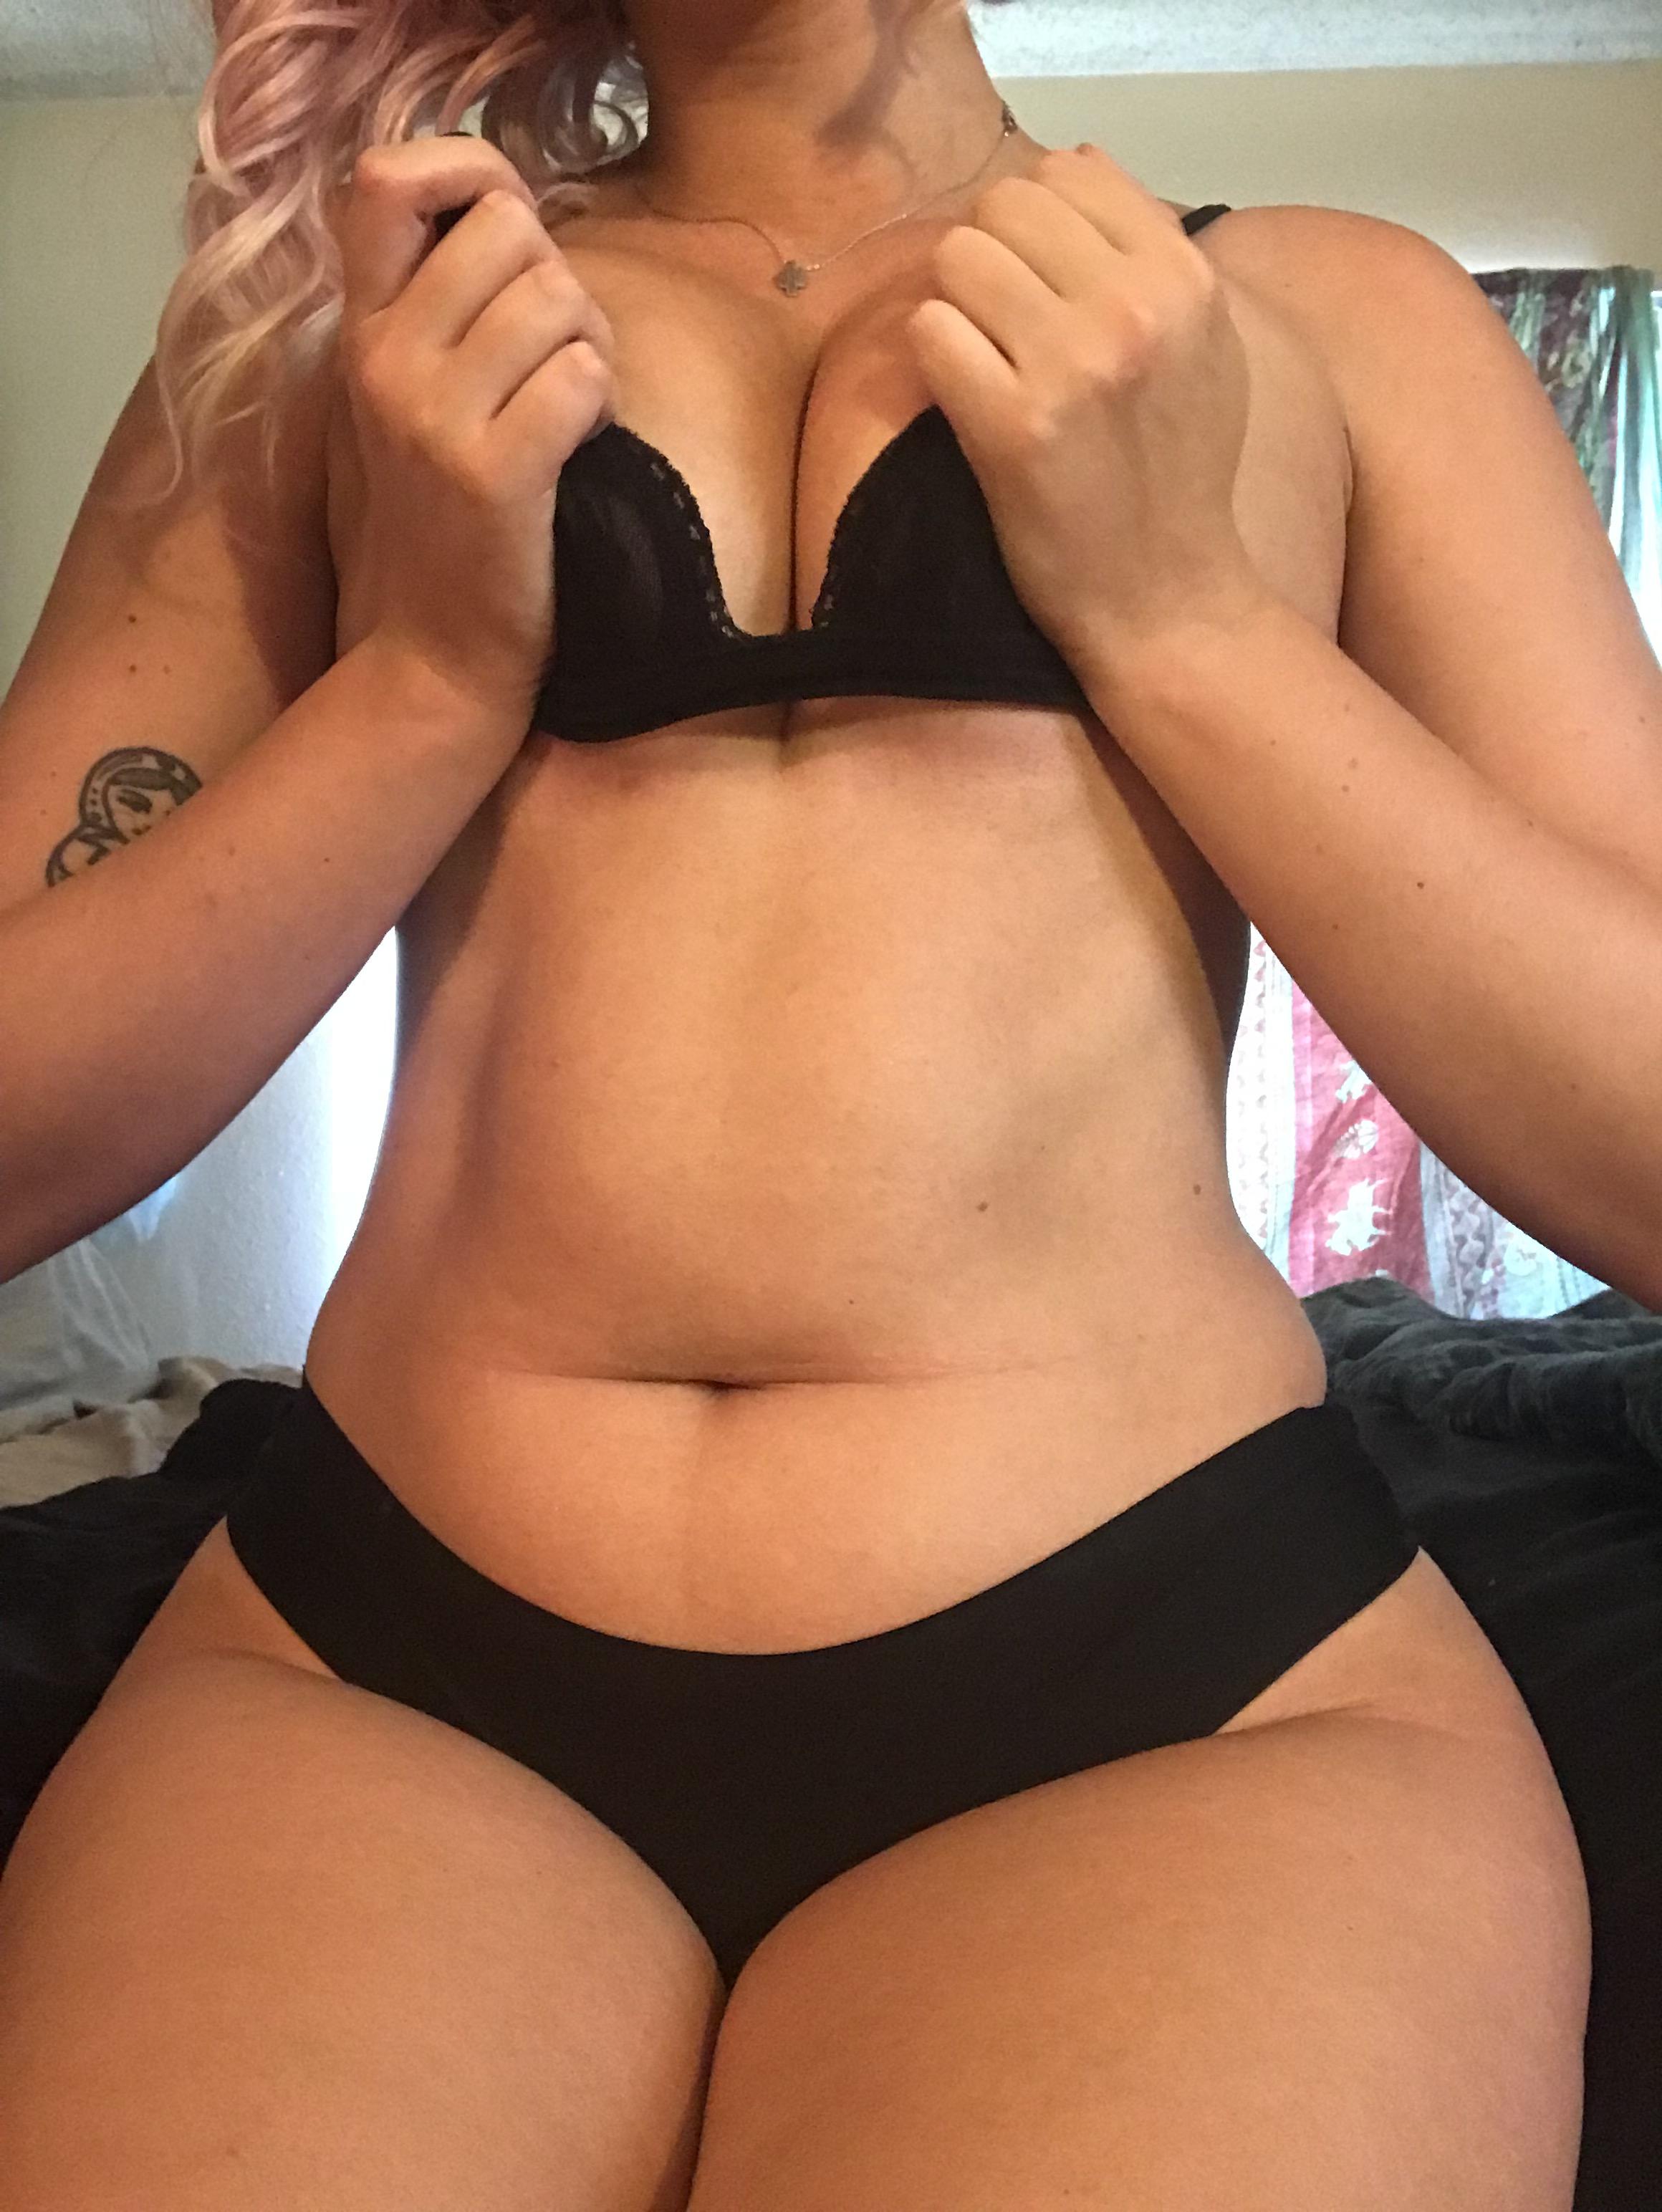 These thighs aren’t here to play- [F]21